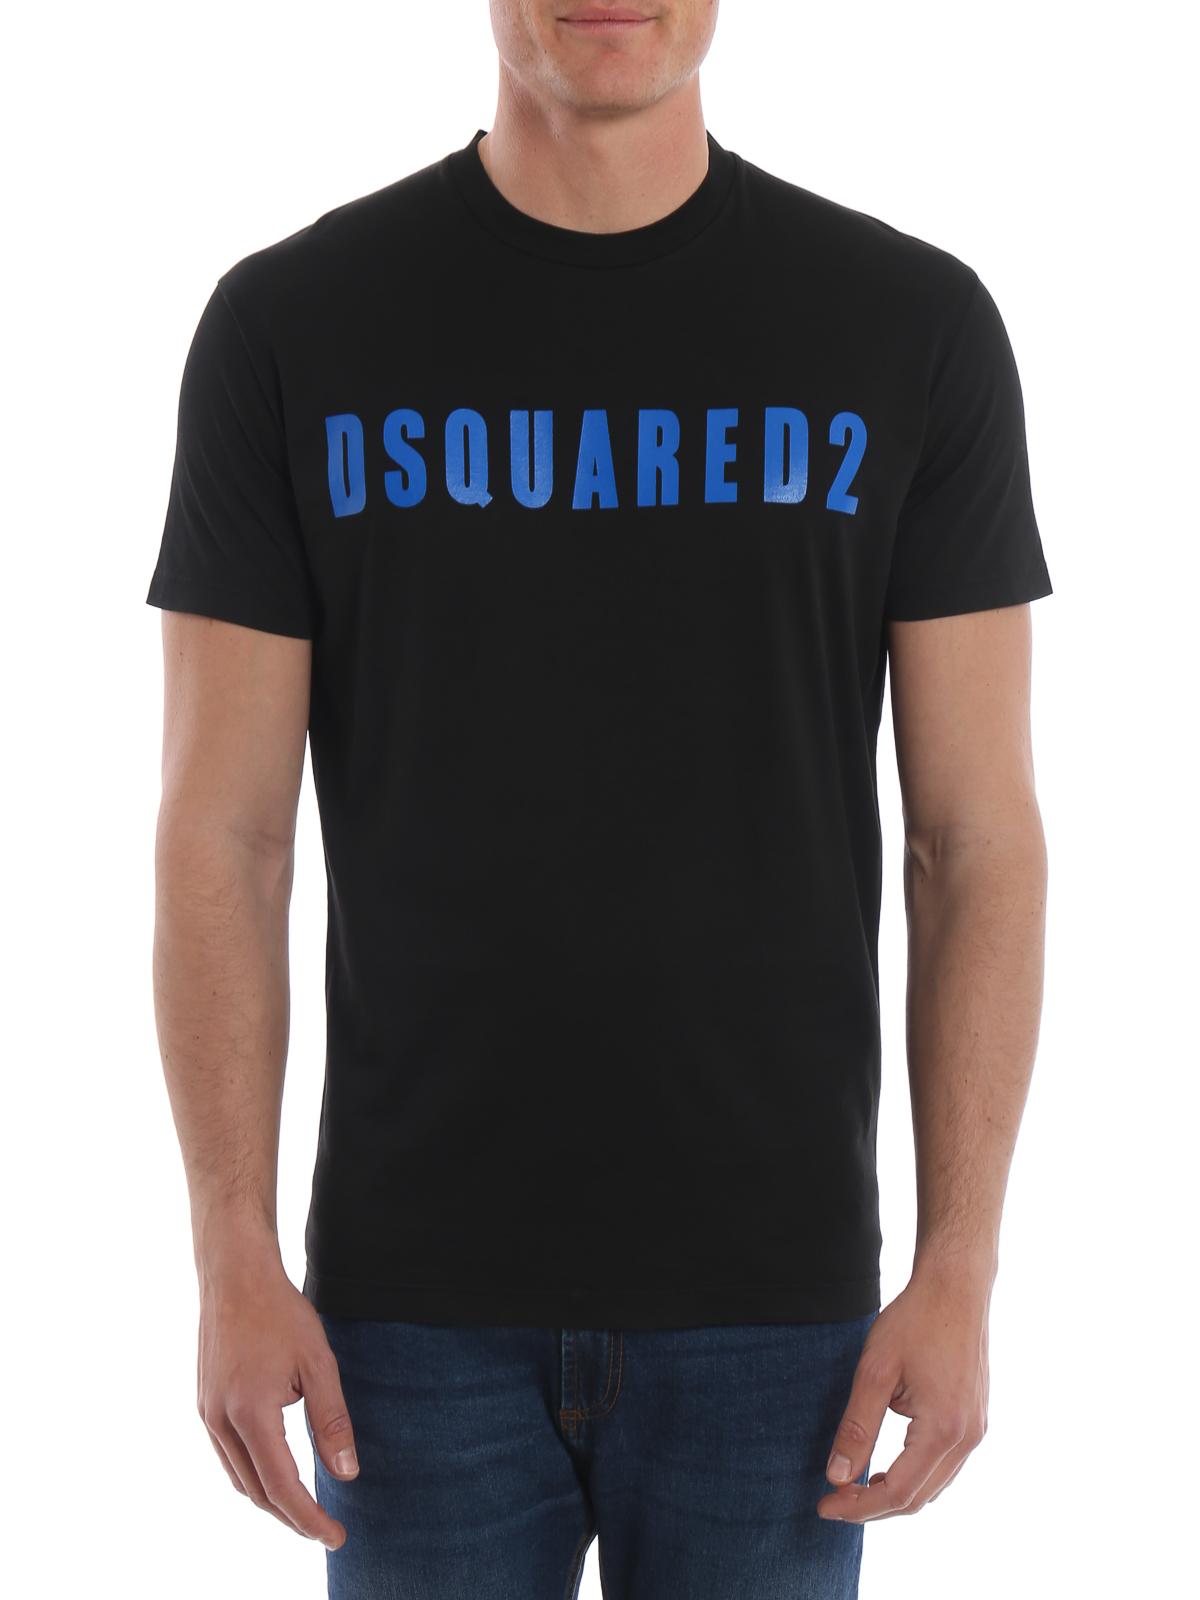 dsquared2 t shirt black and blue